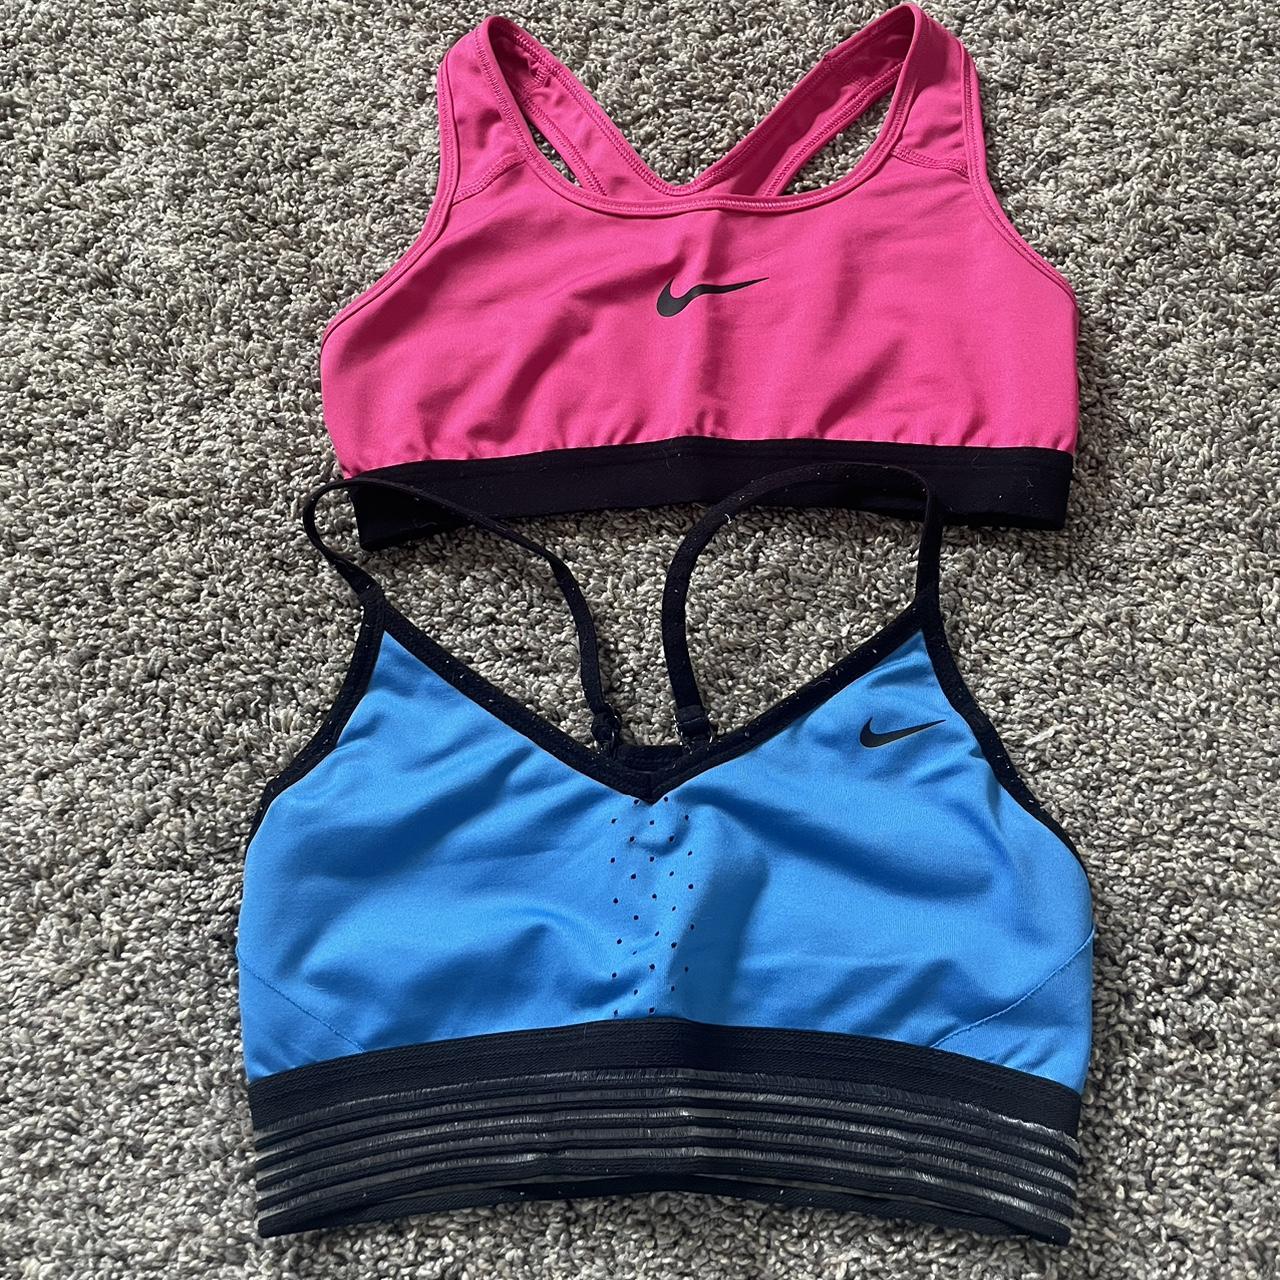 nike bras size small 10$ for both - both used - can - Depop